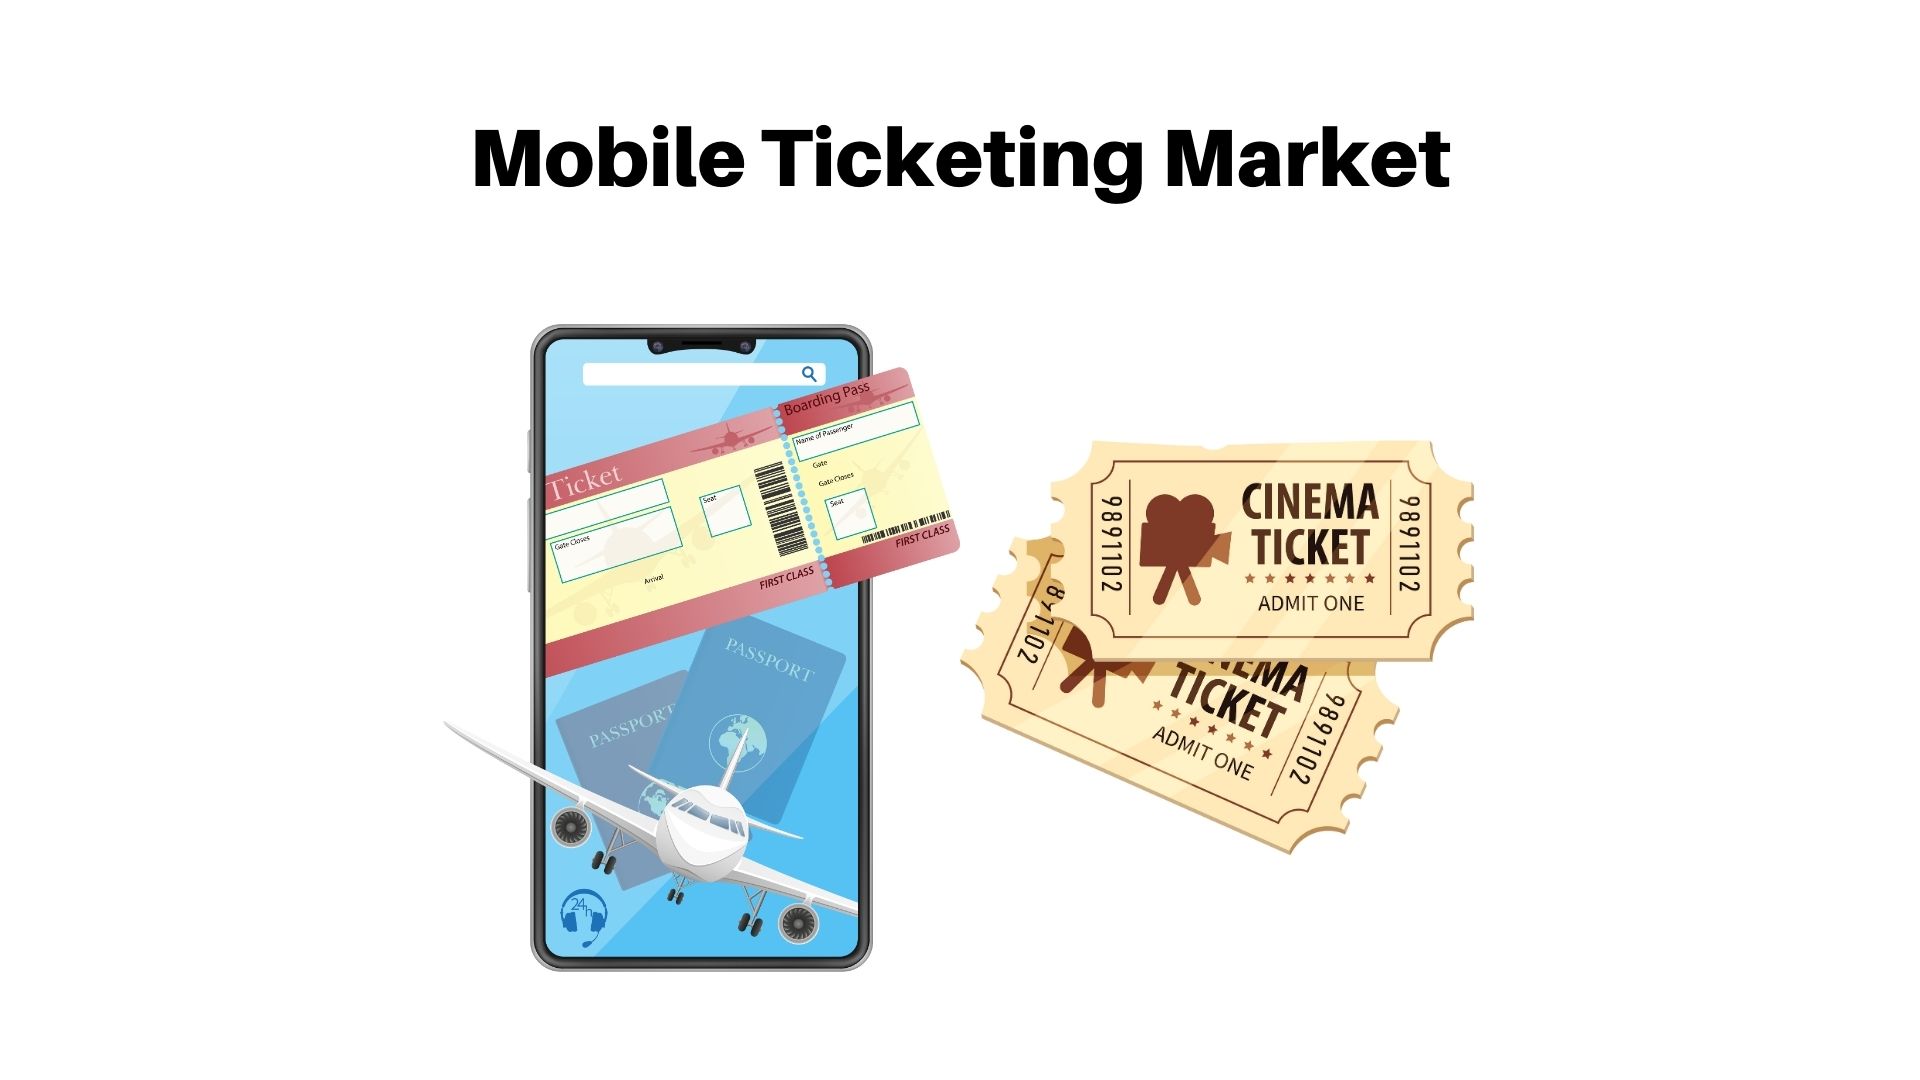 Mobile Ticketing Market Report Offers In-Depth Analysis + Growth Rate 19.7% by 2032